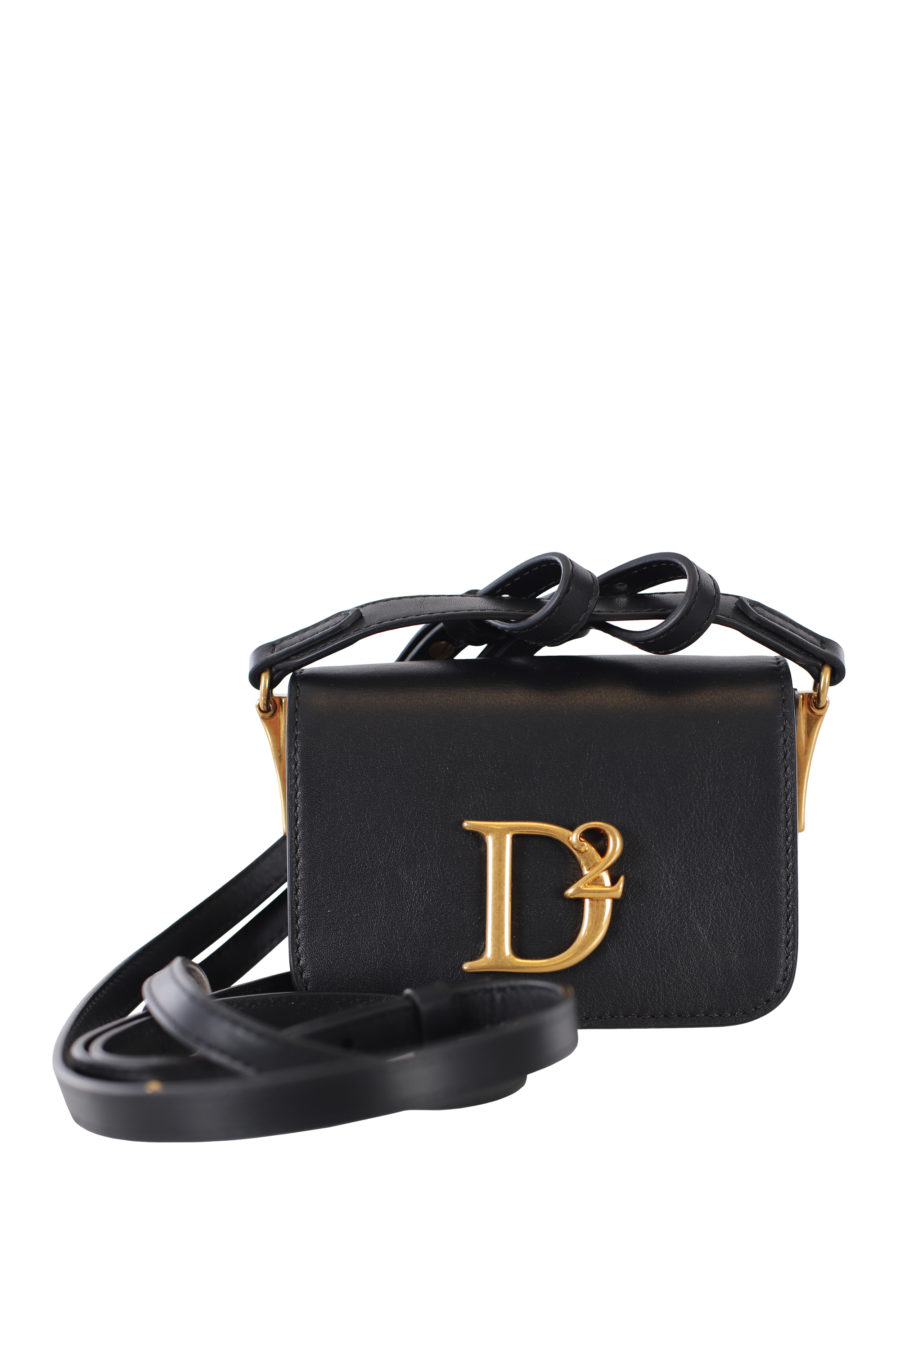 Black crossbody bag with gold detail - IMG 9382